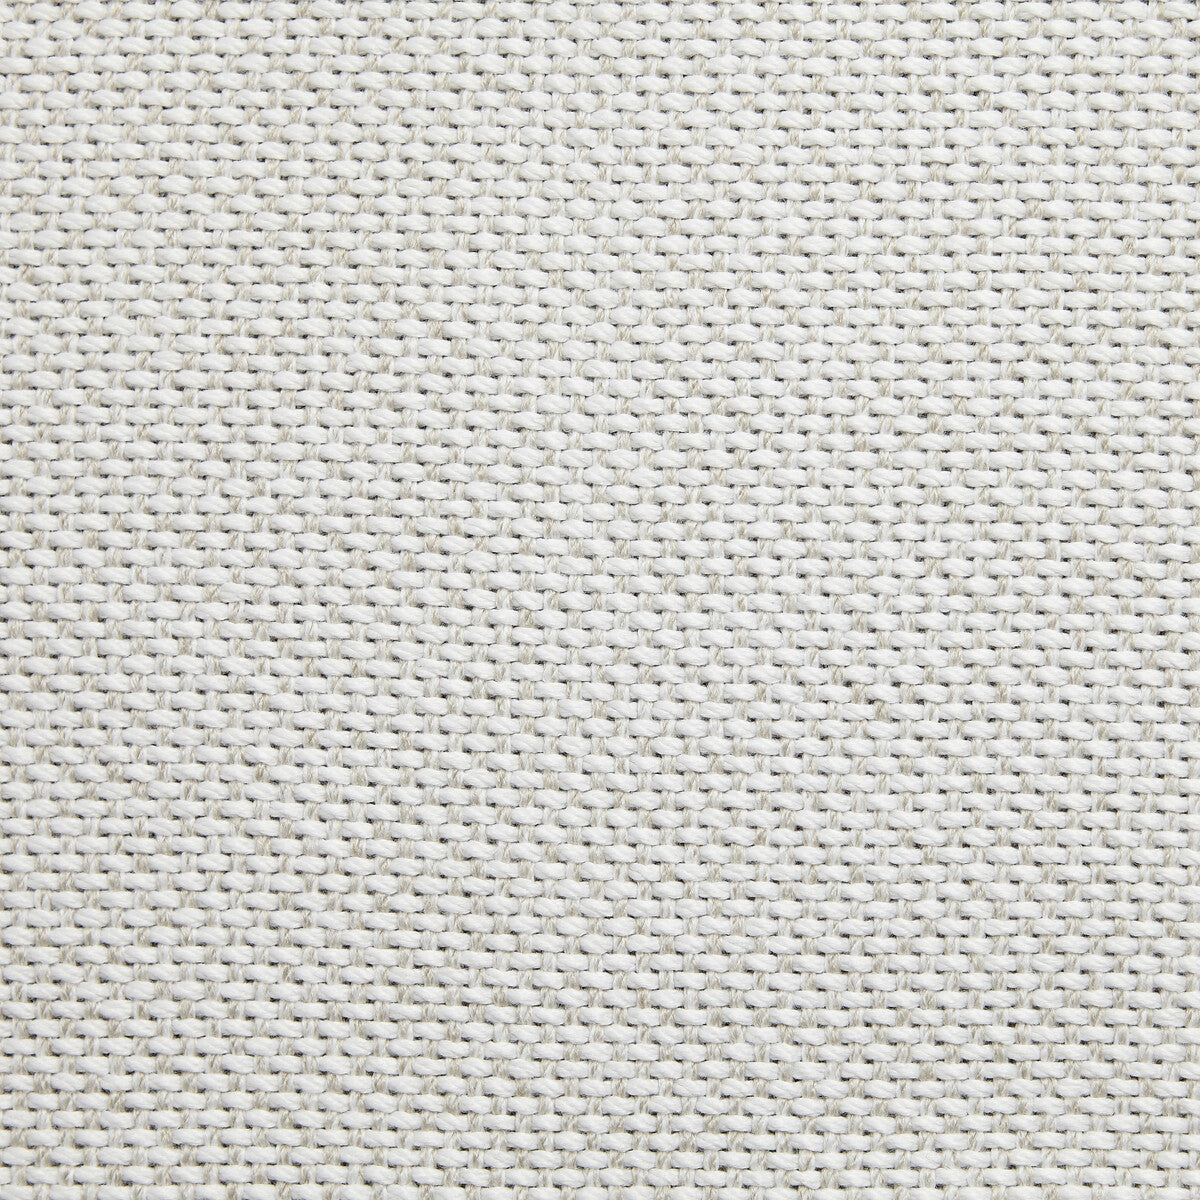 Begur fabric in 7 color - pattern LZ-30397.07.0 - by Kravet Design in the Lizzo Indoor/Outdoor collection